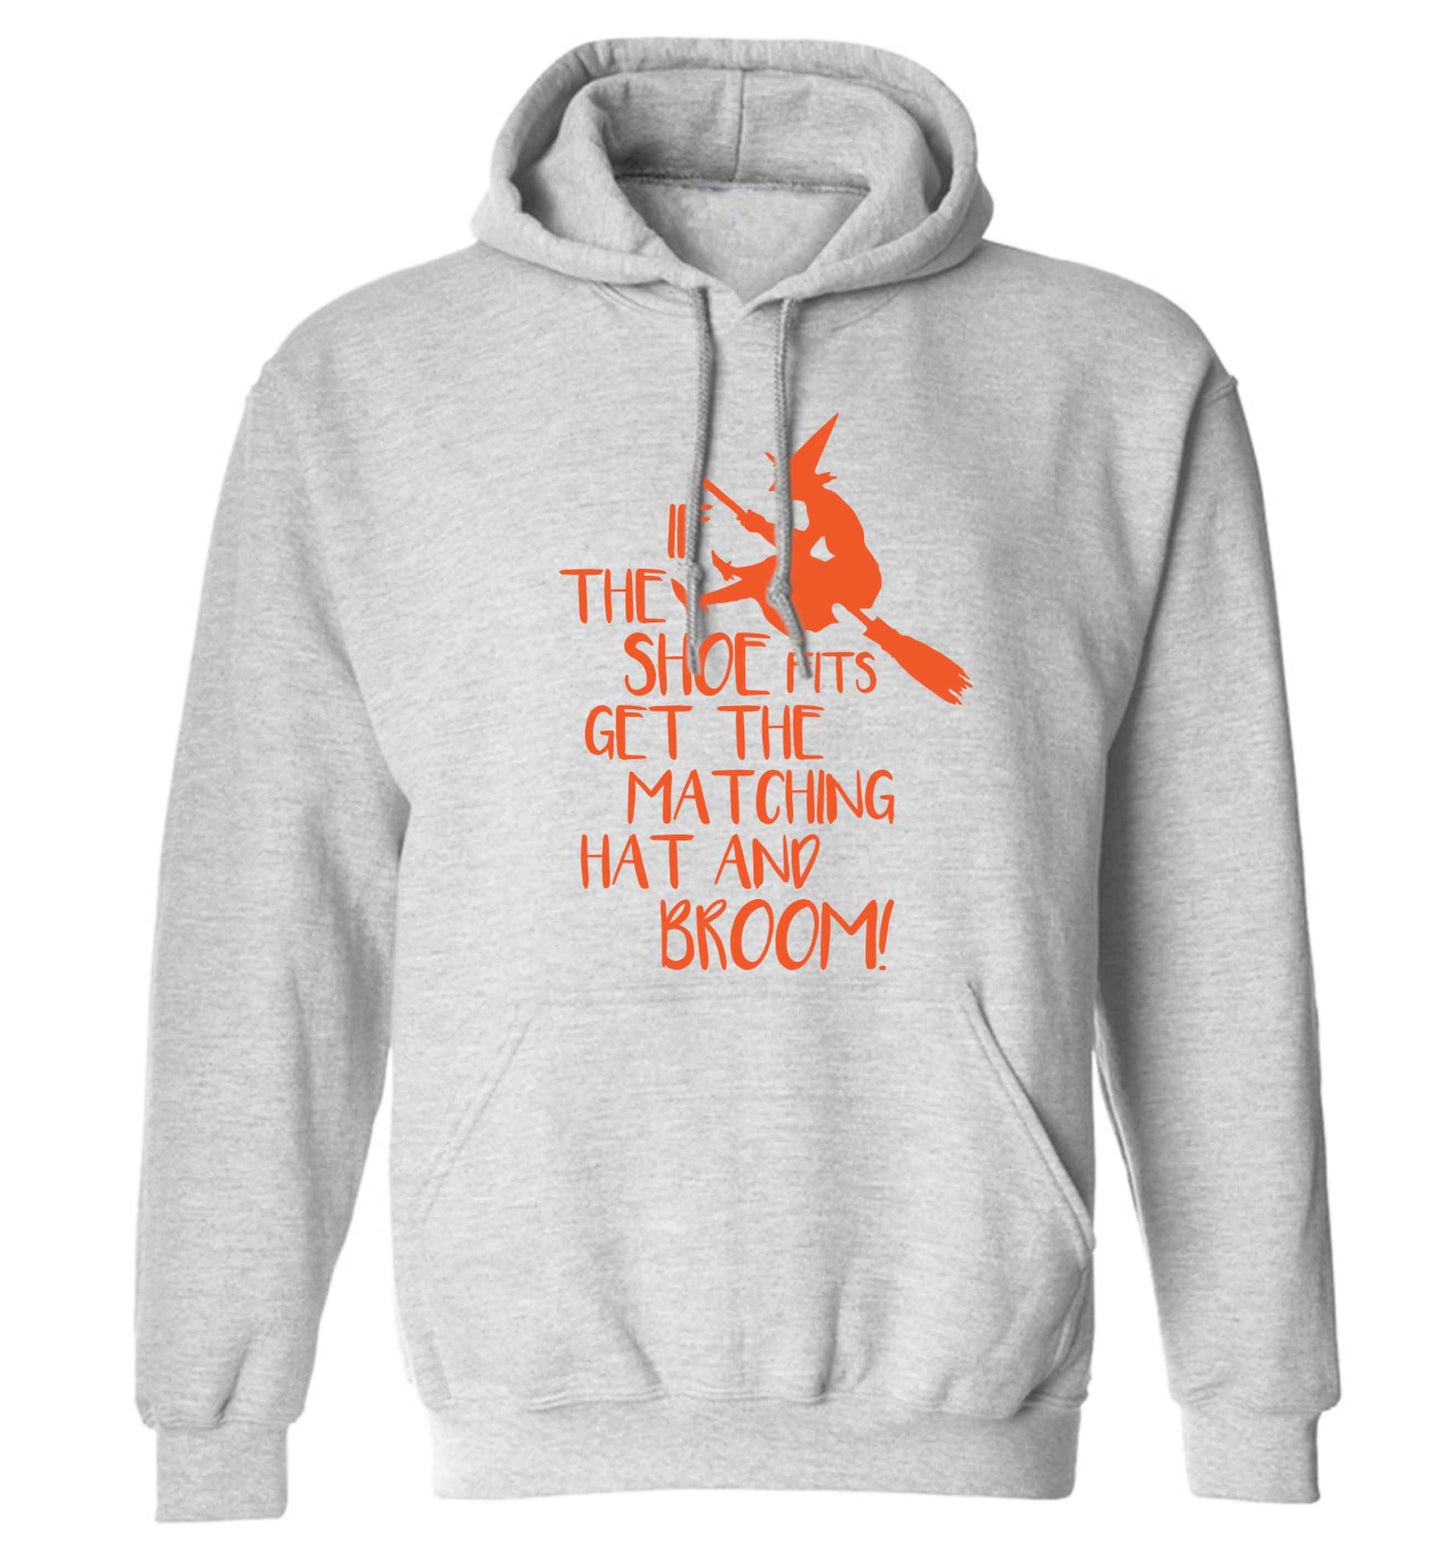 If the shoe fits get the matching hat and broom adults unisex grey hoodie 2XL